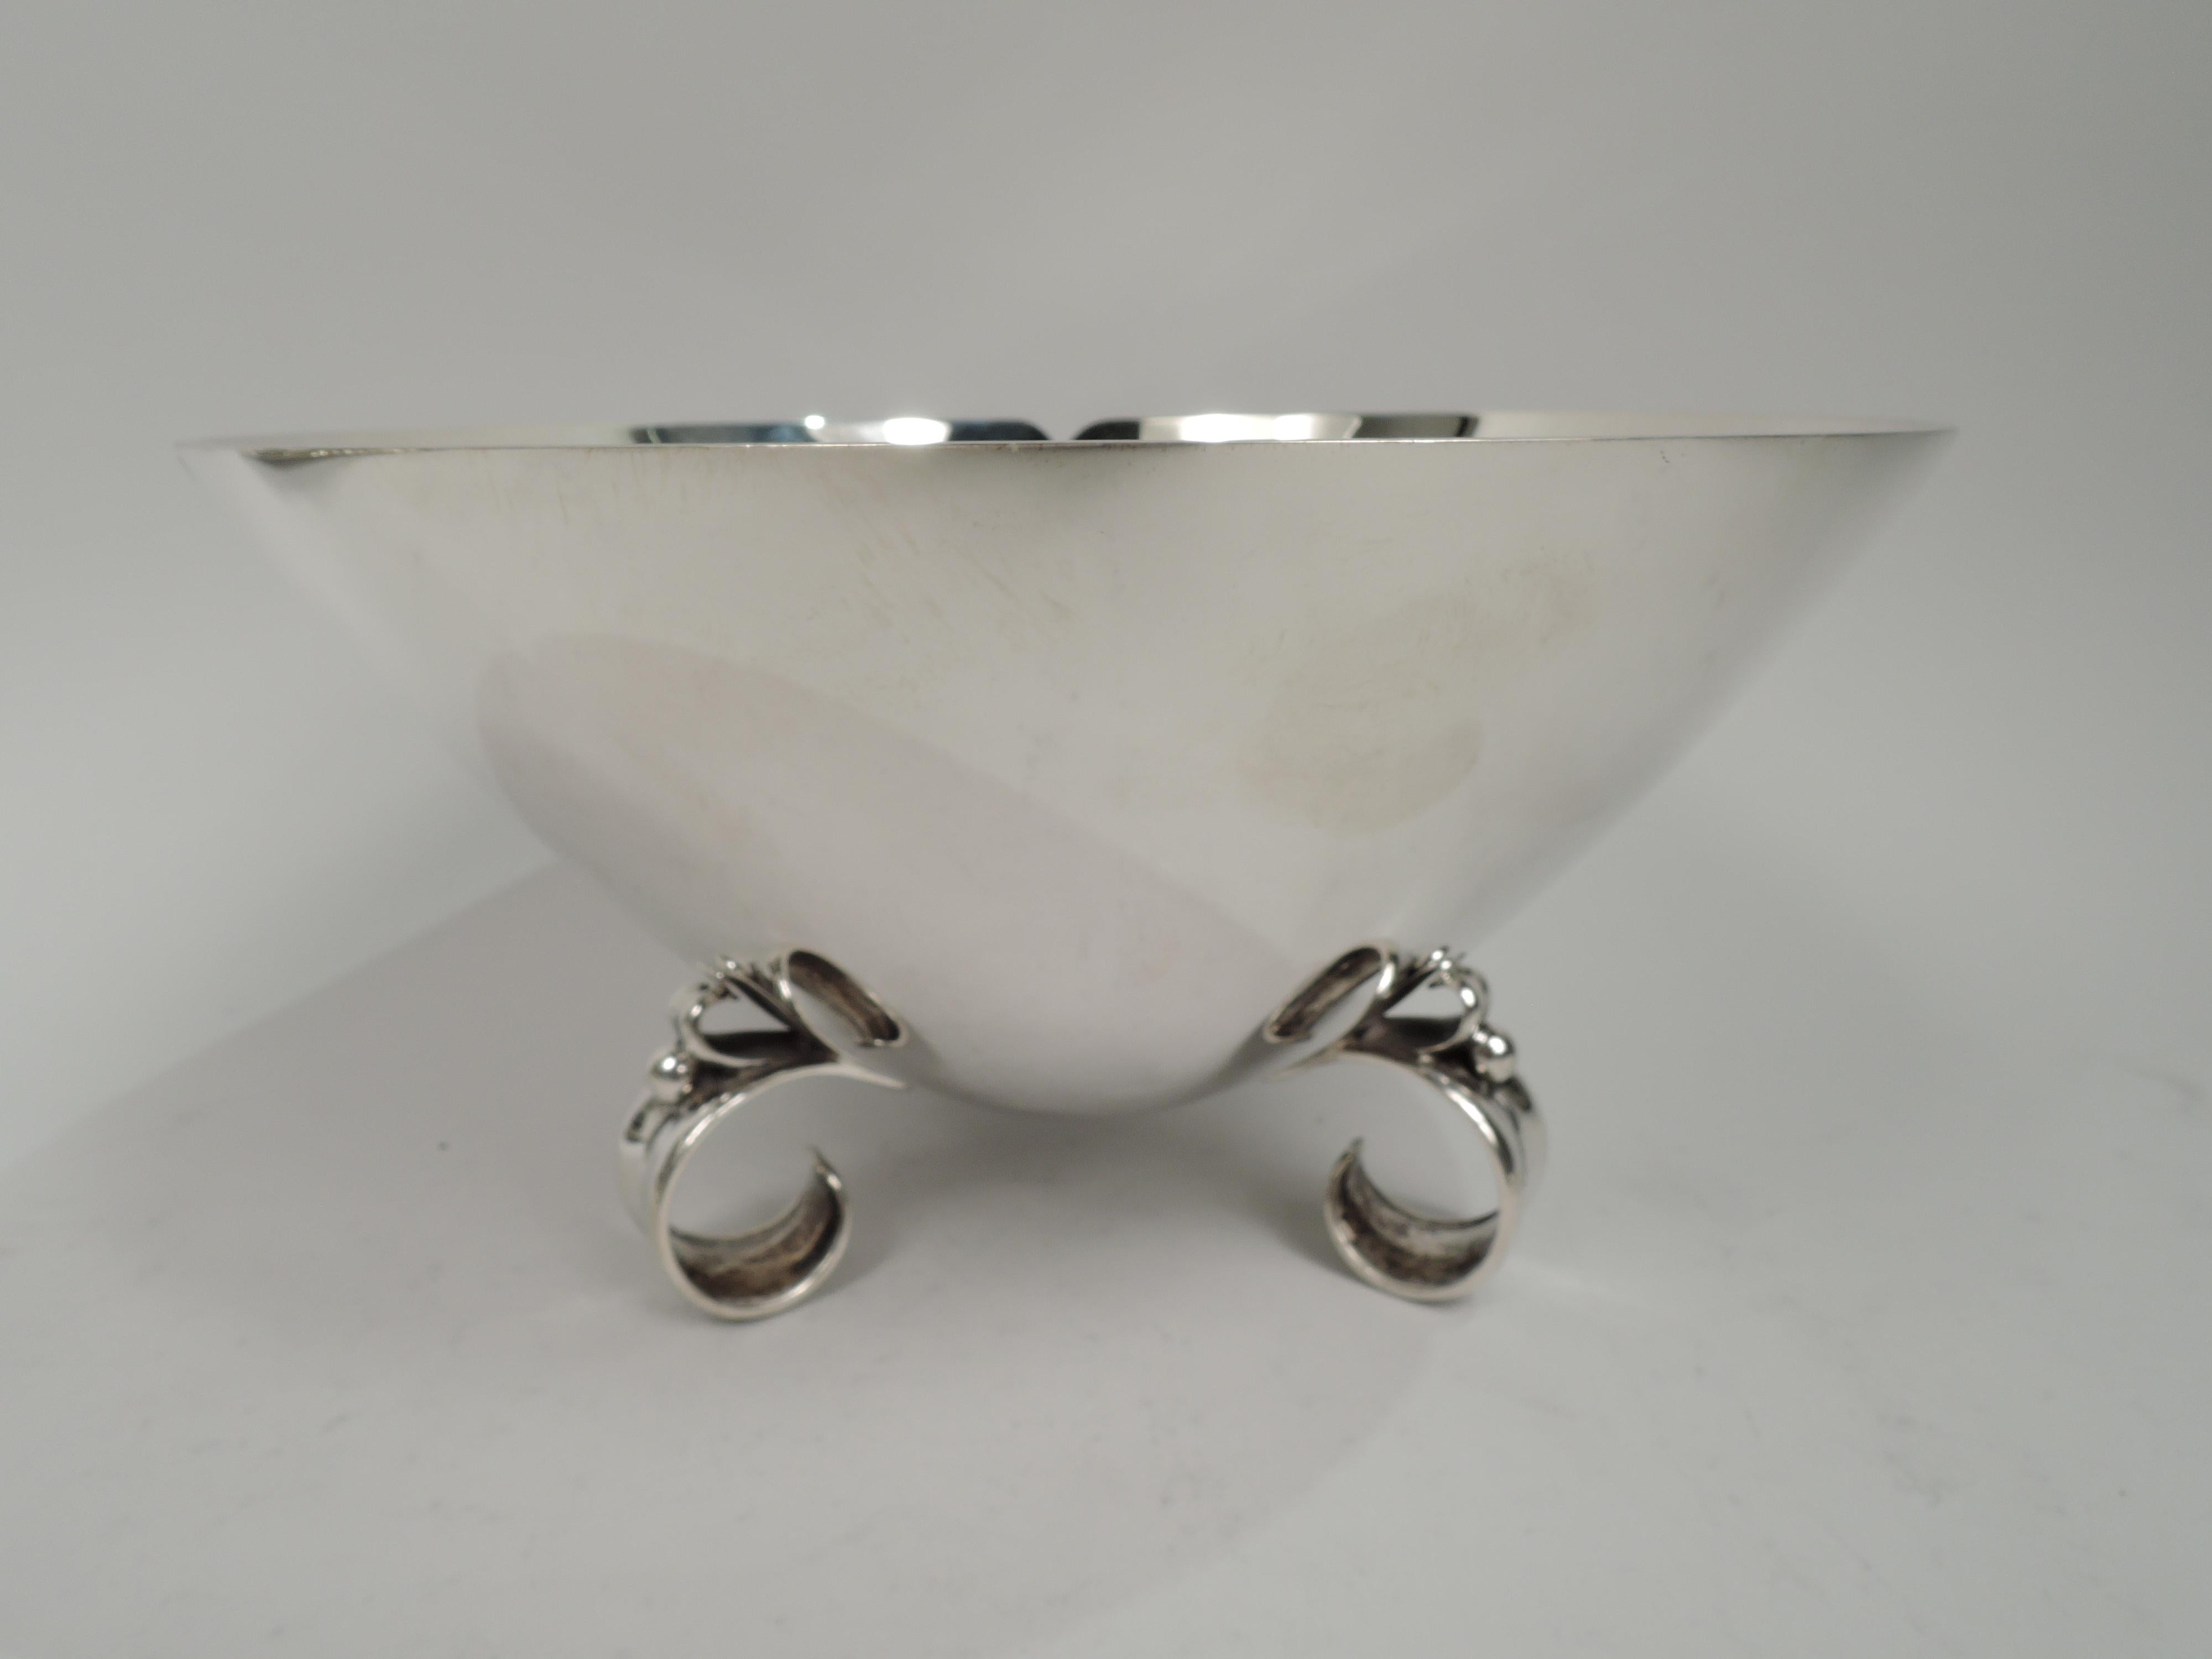 Midcentury Modern sterling silver bowl. Cone comprising 3 curved and incised panels with shallow petal rim. Tripod support comprising 3 concave c-scrolls with bead and scroll mount. The mount and its reflection form a heart. A clever illusory design